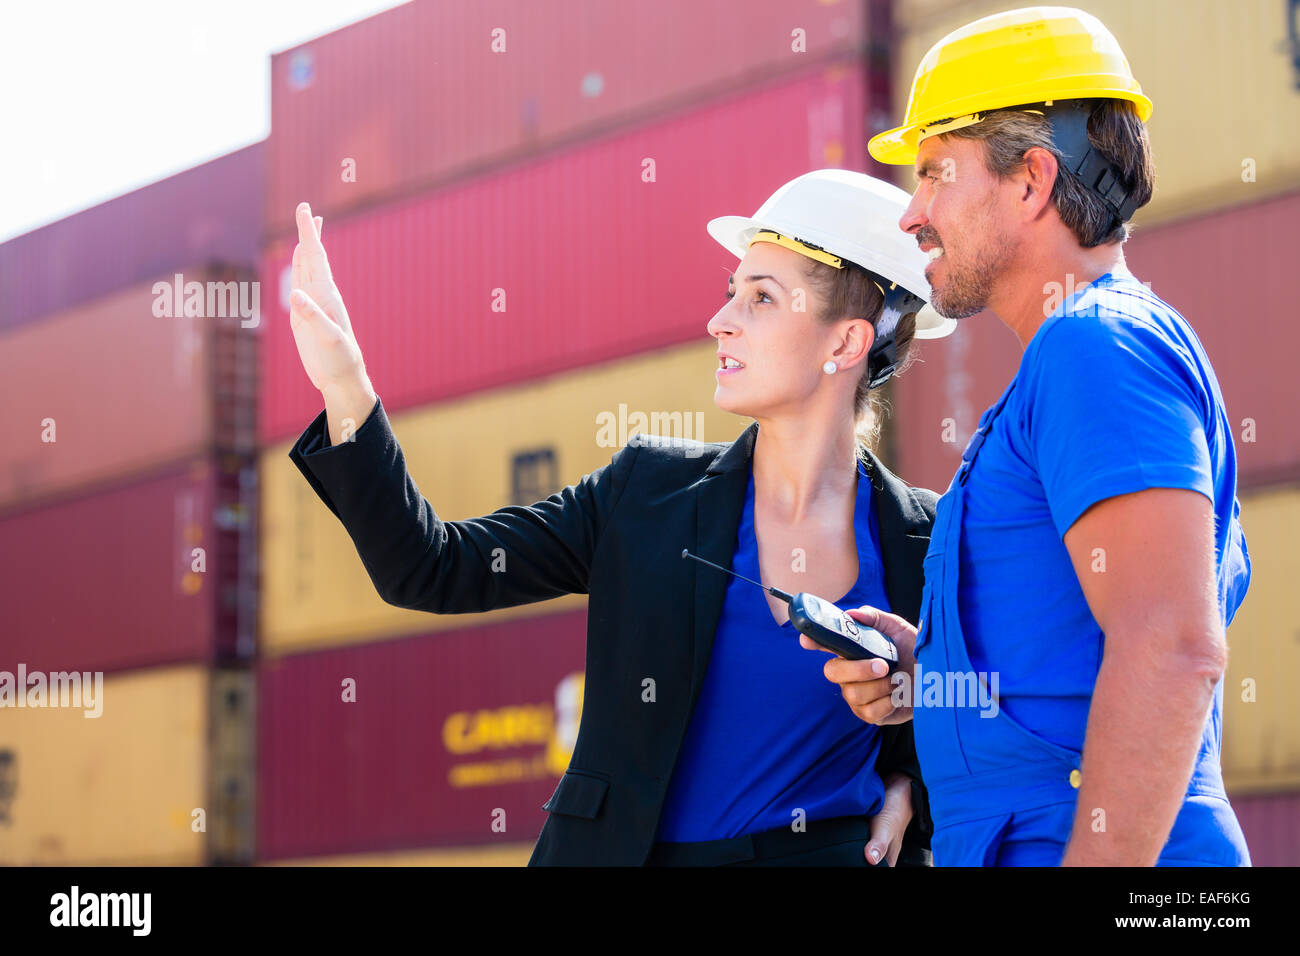 Freight shipping at container terminal of port, worker and manager discussing shipments Stock Photo